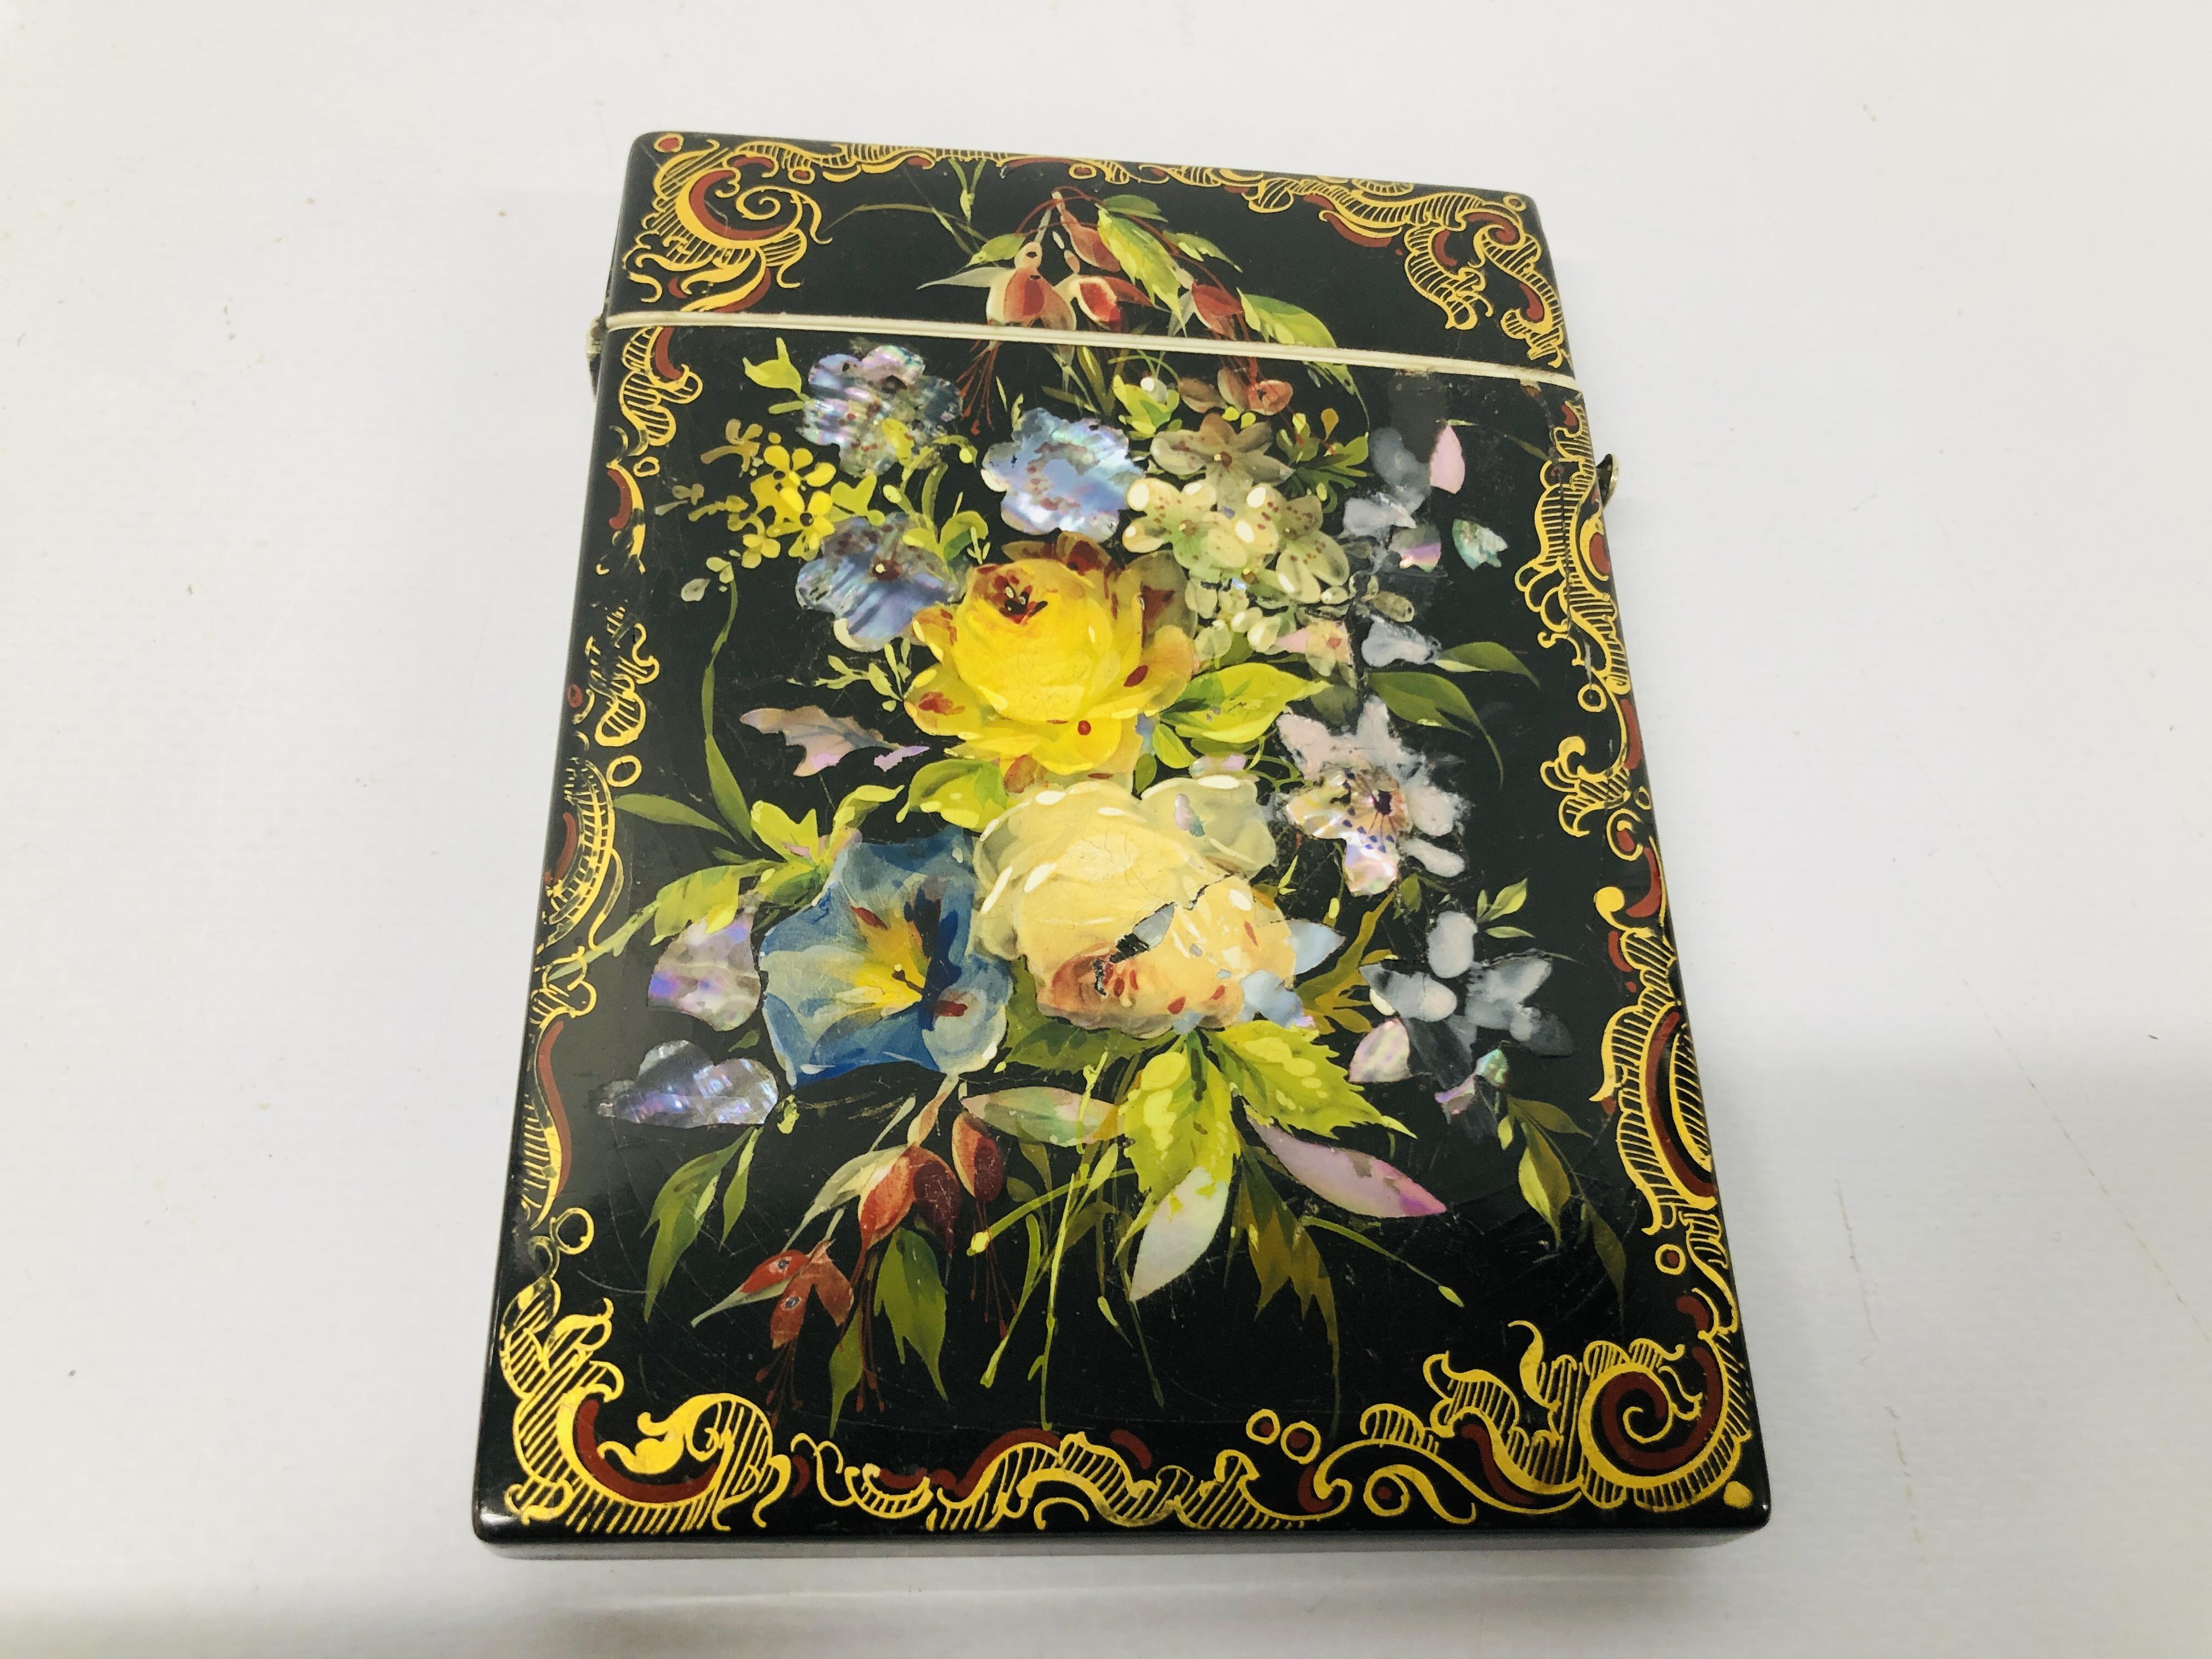 2 X VICTORIAN PAPIER MACHE CARD CASES BEAUTIFULLY DECORATED WITH HAND PAINTING MOTHER OF PEARL - Image 6 of 7